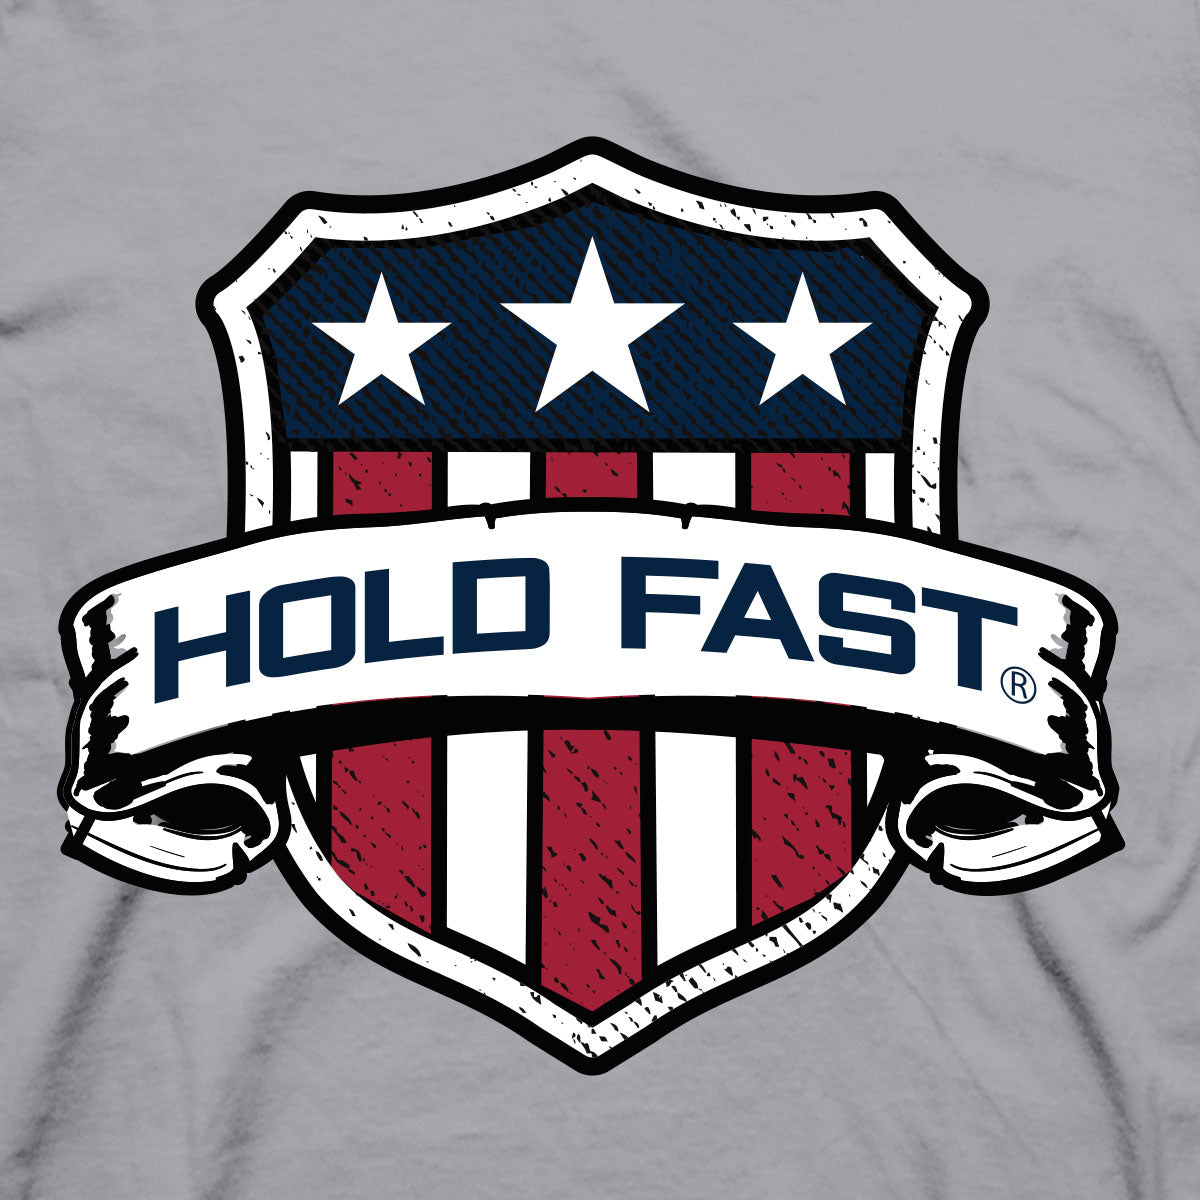 HOLD FAST American Eagle Shirt For Men